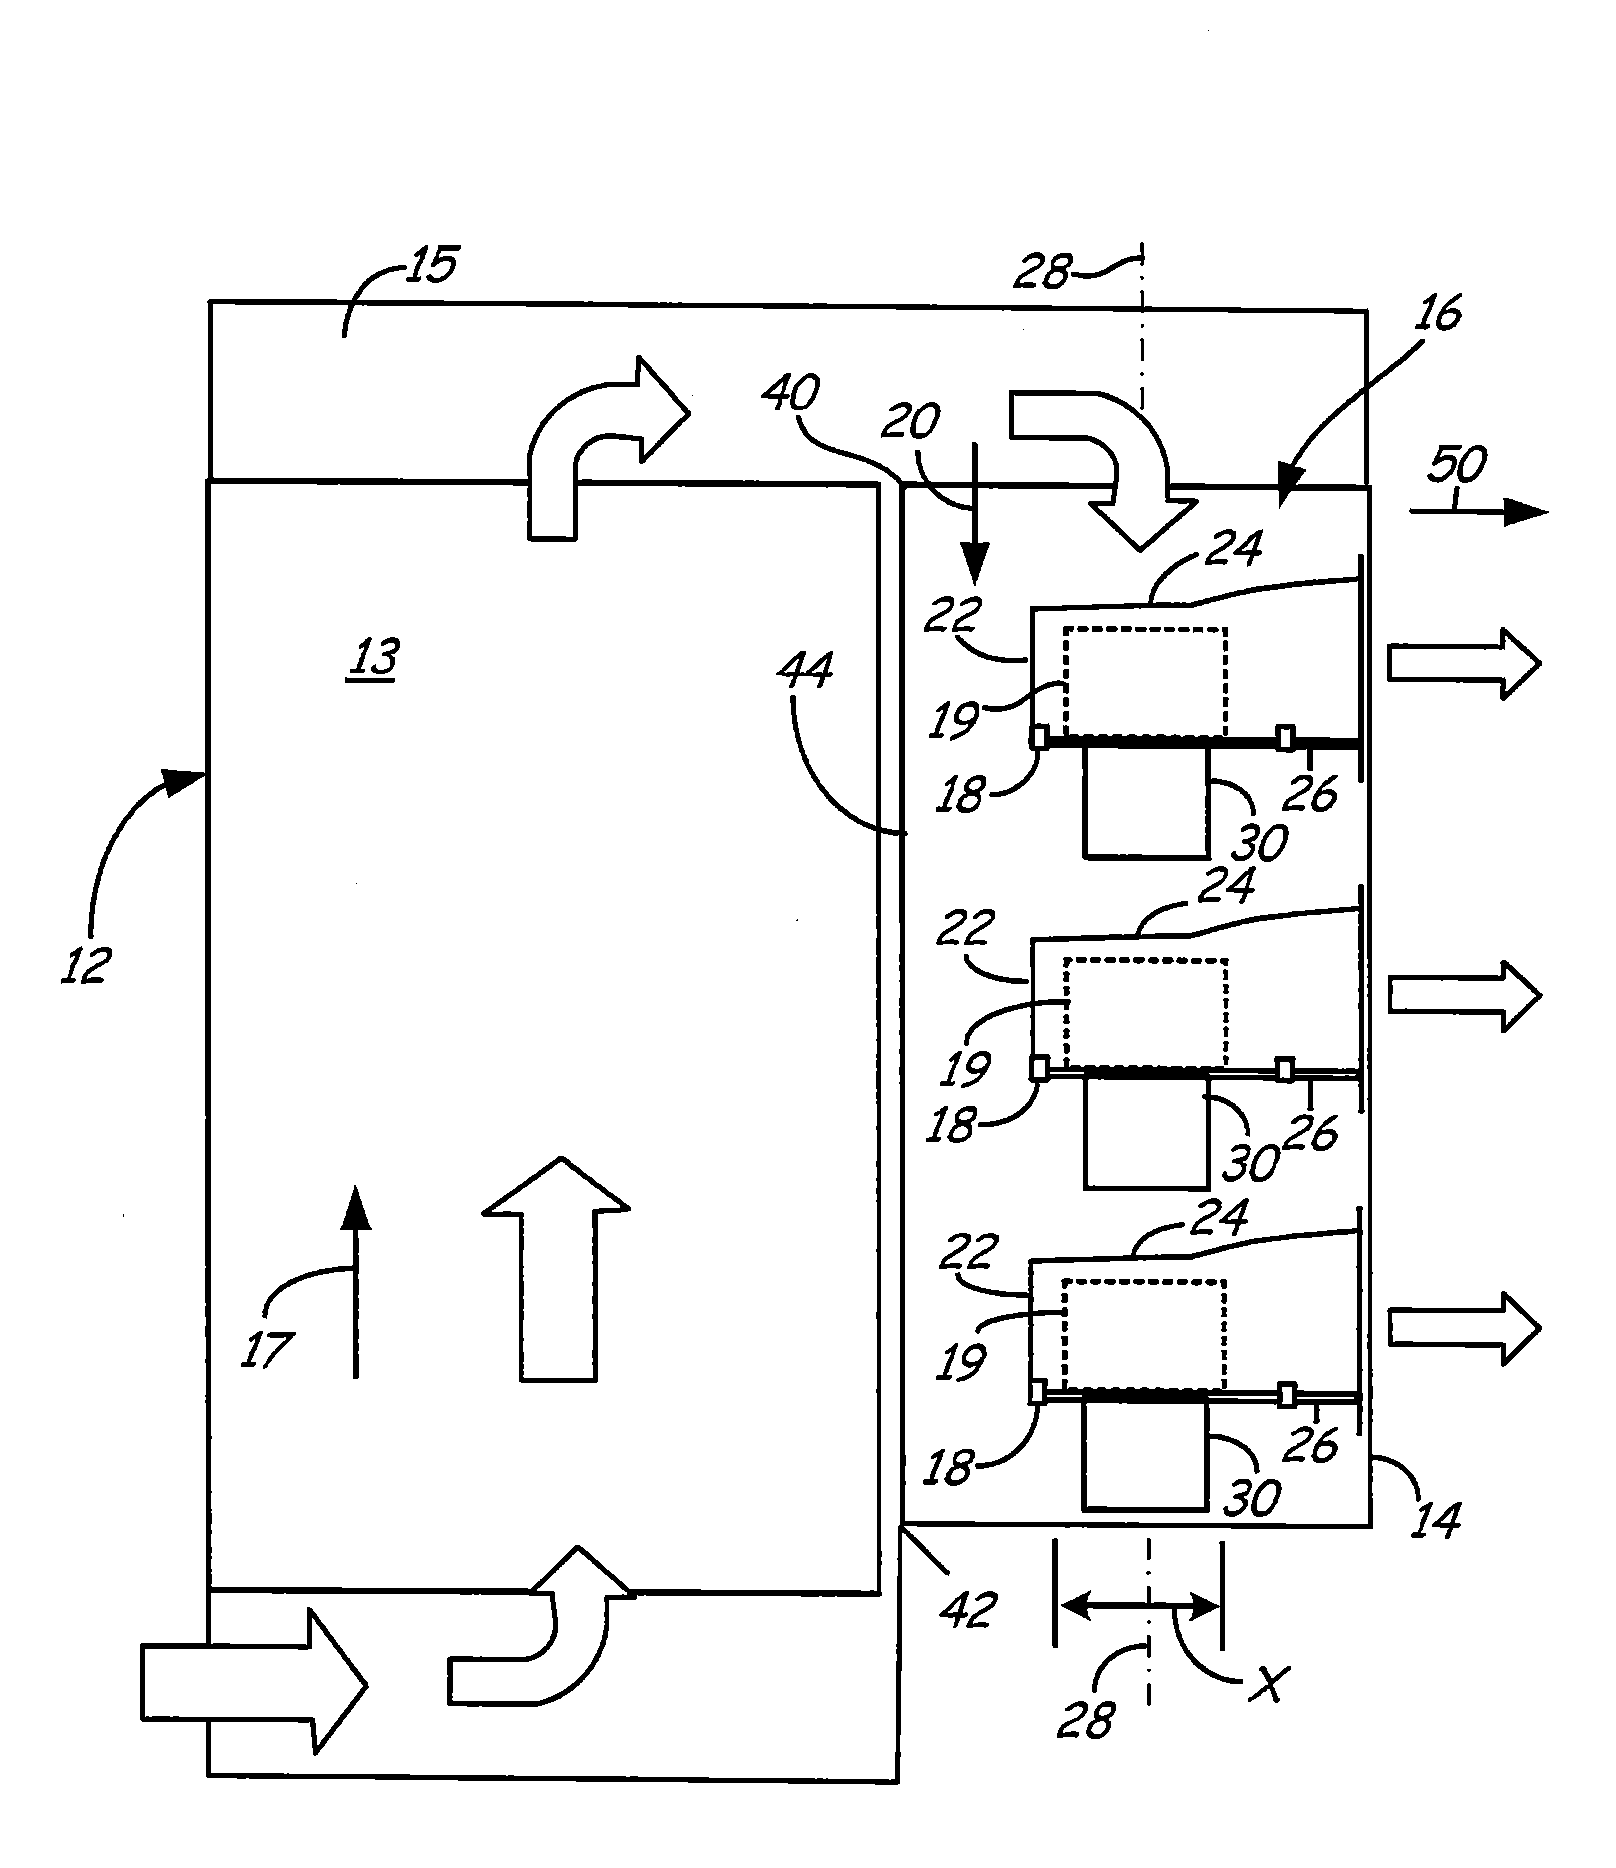 Cooling module with multiple parallel blowers